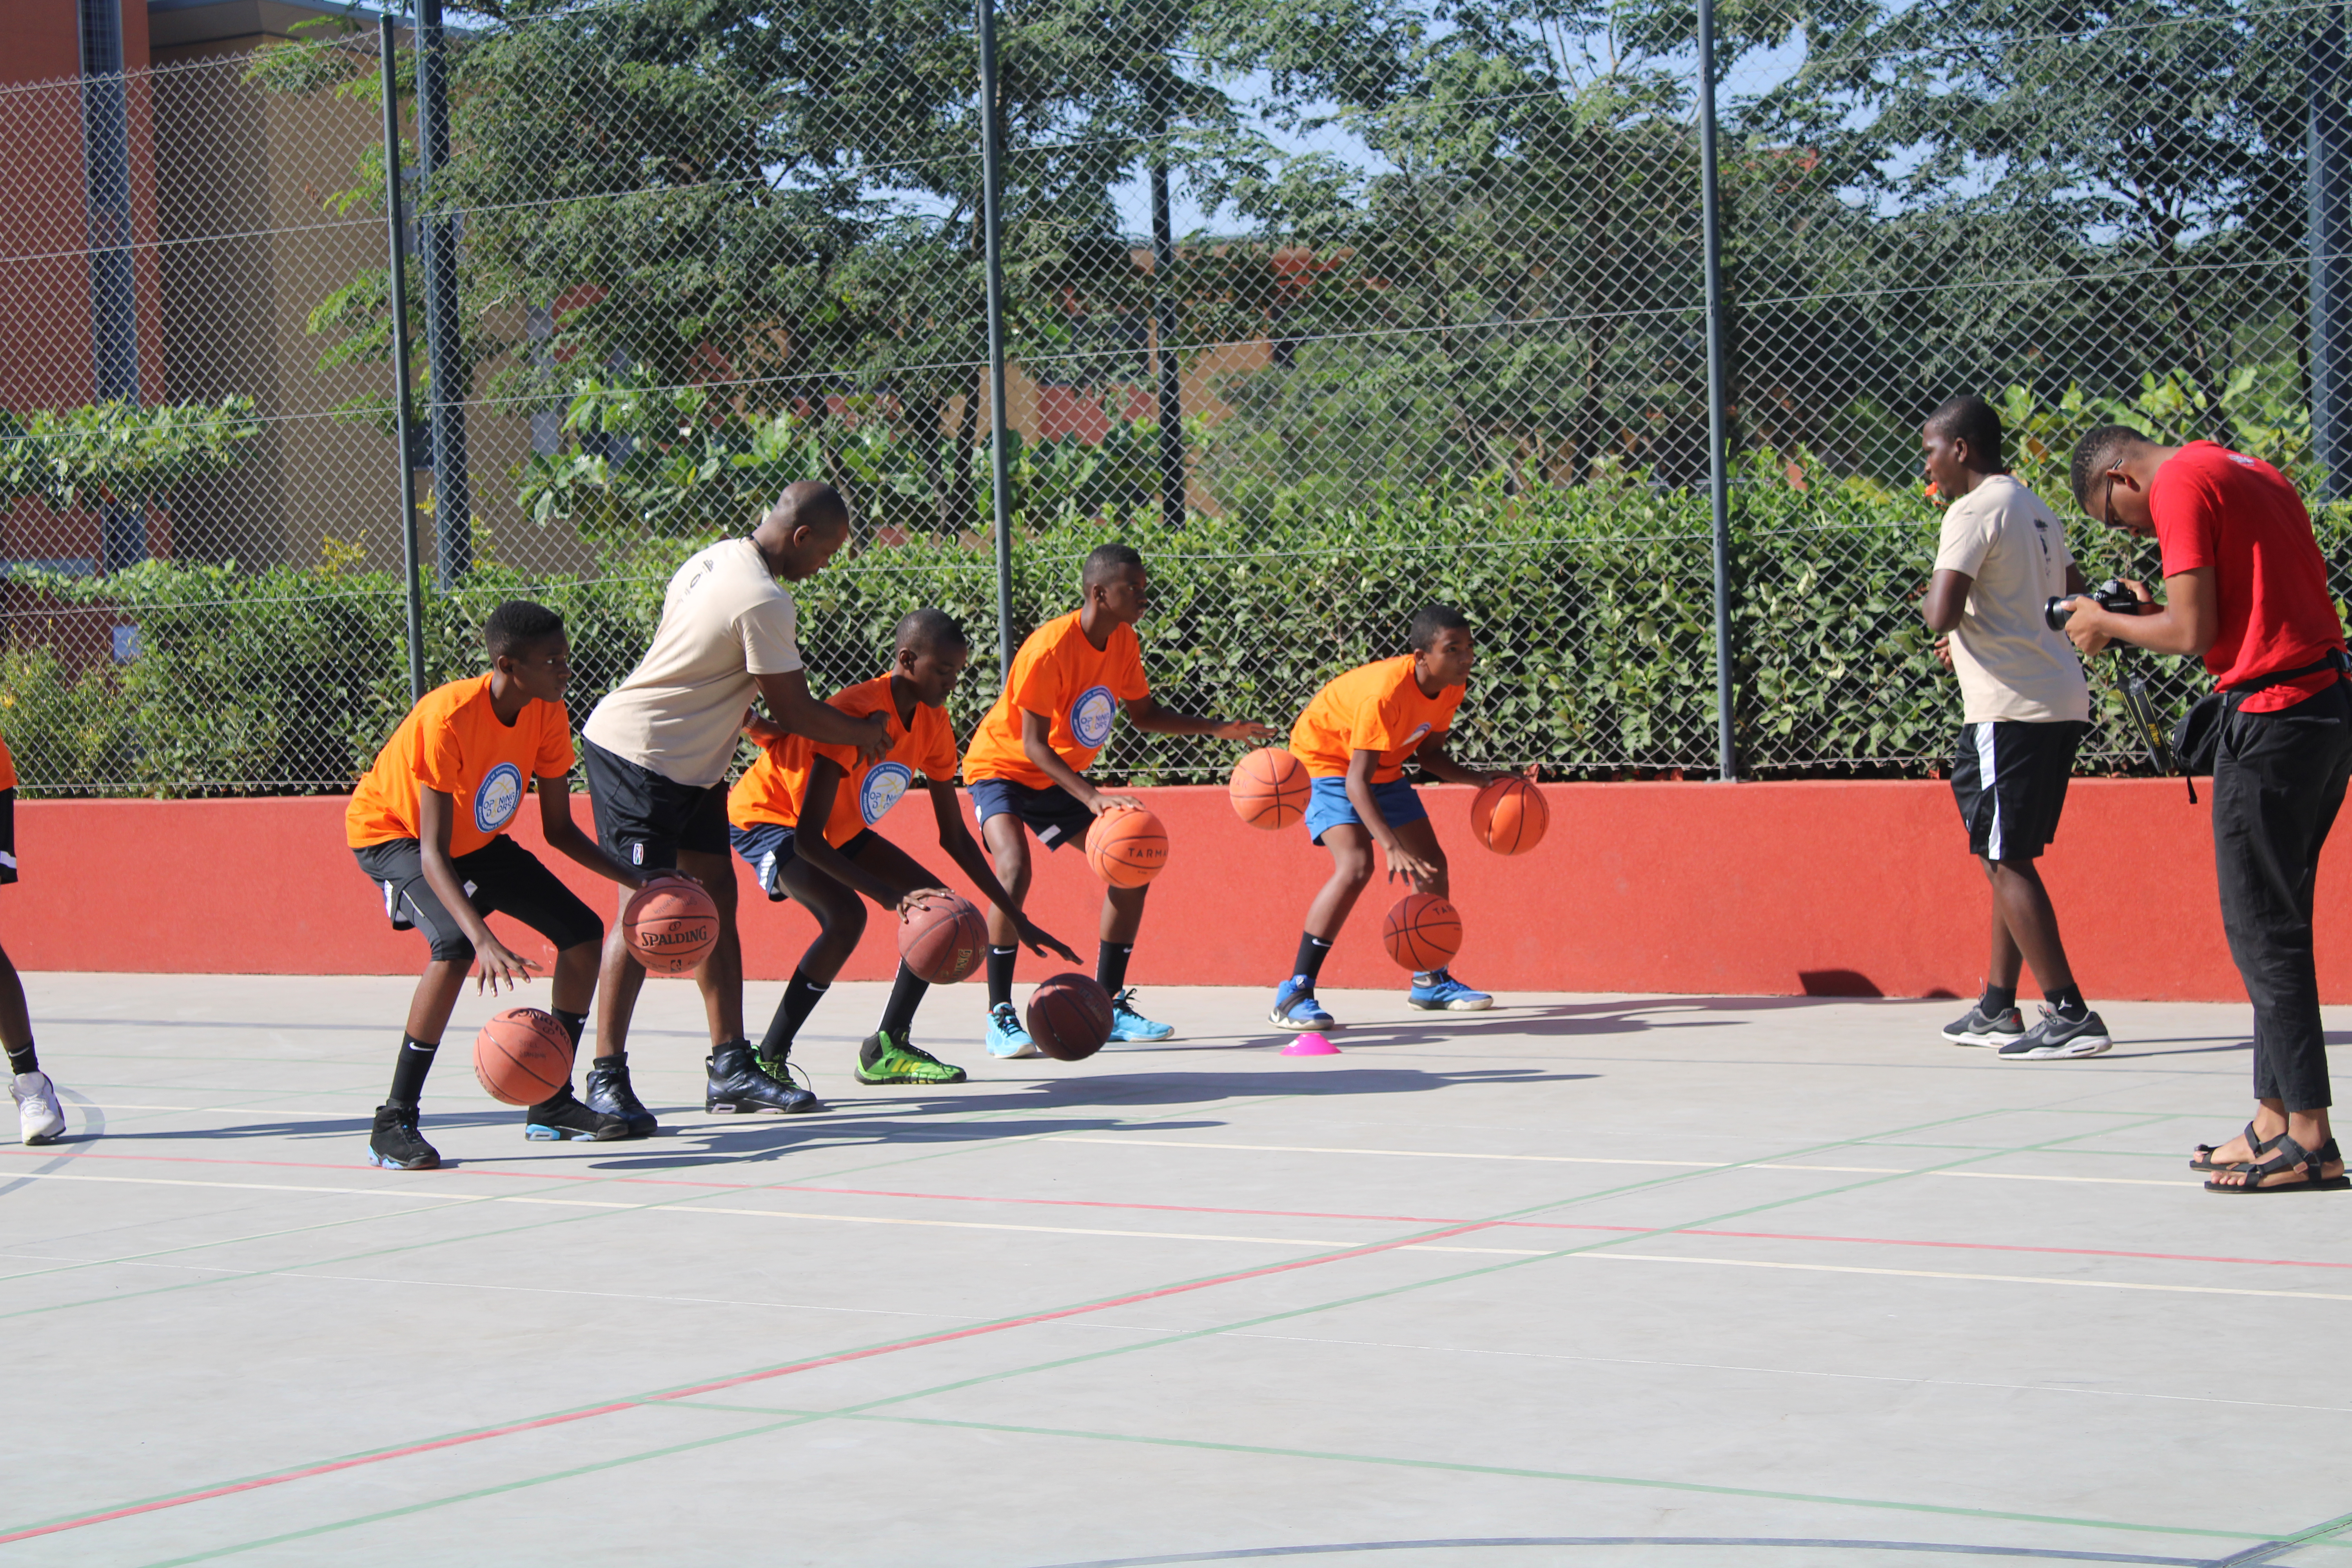 Students training in the court at the Academy